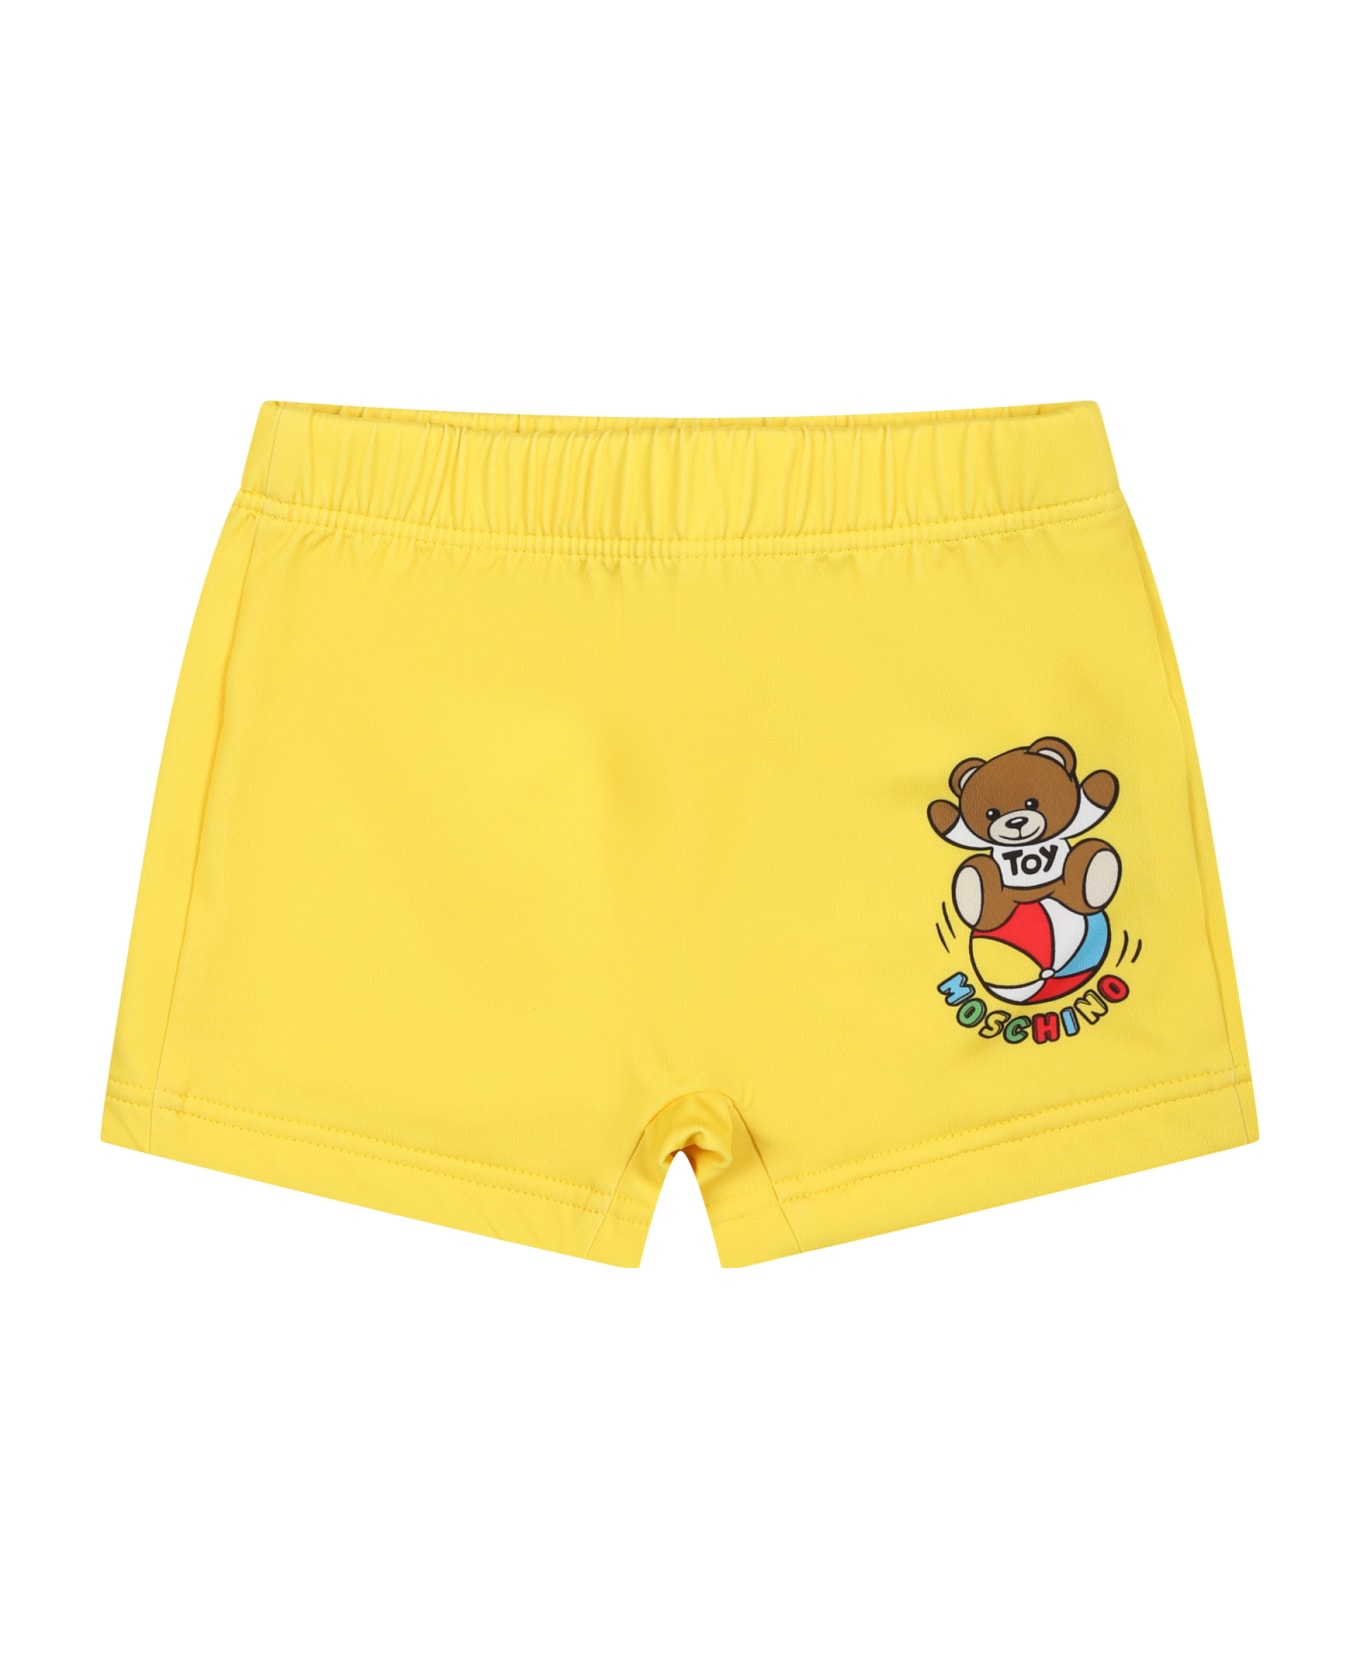 Moschino Yellow Swimsuit For Baby Boy With Teddy Bear And Multicolor Logo - Yellow 水着